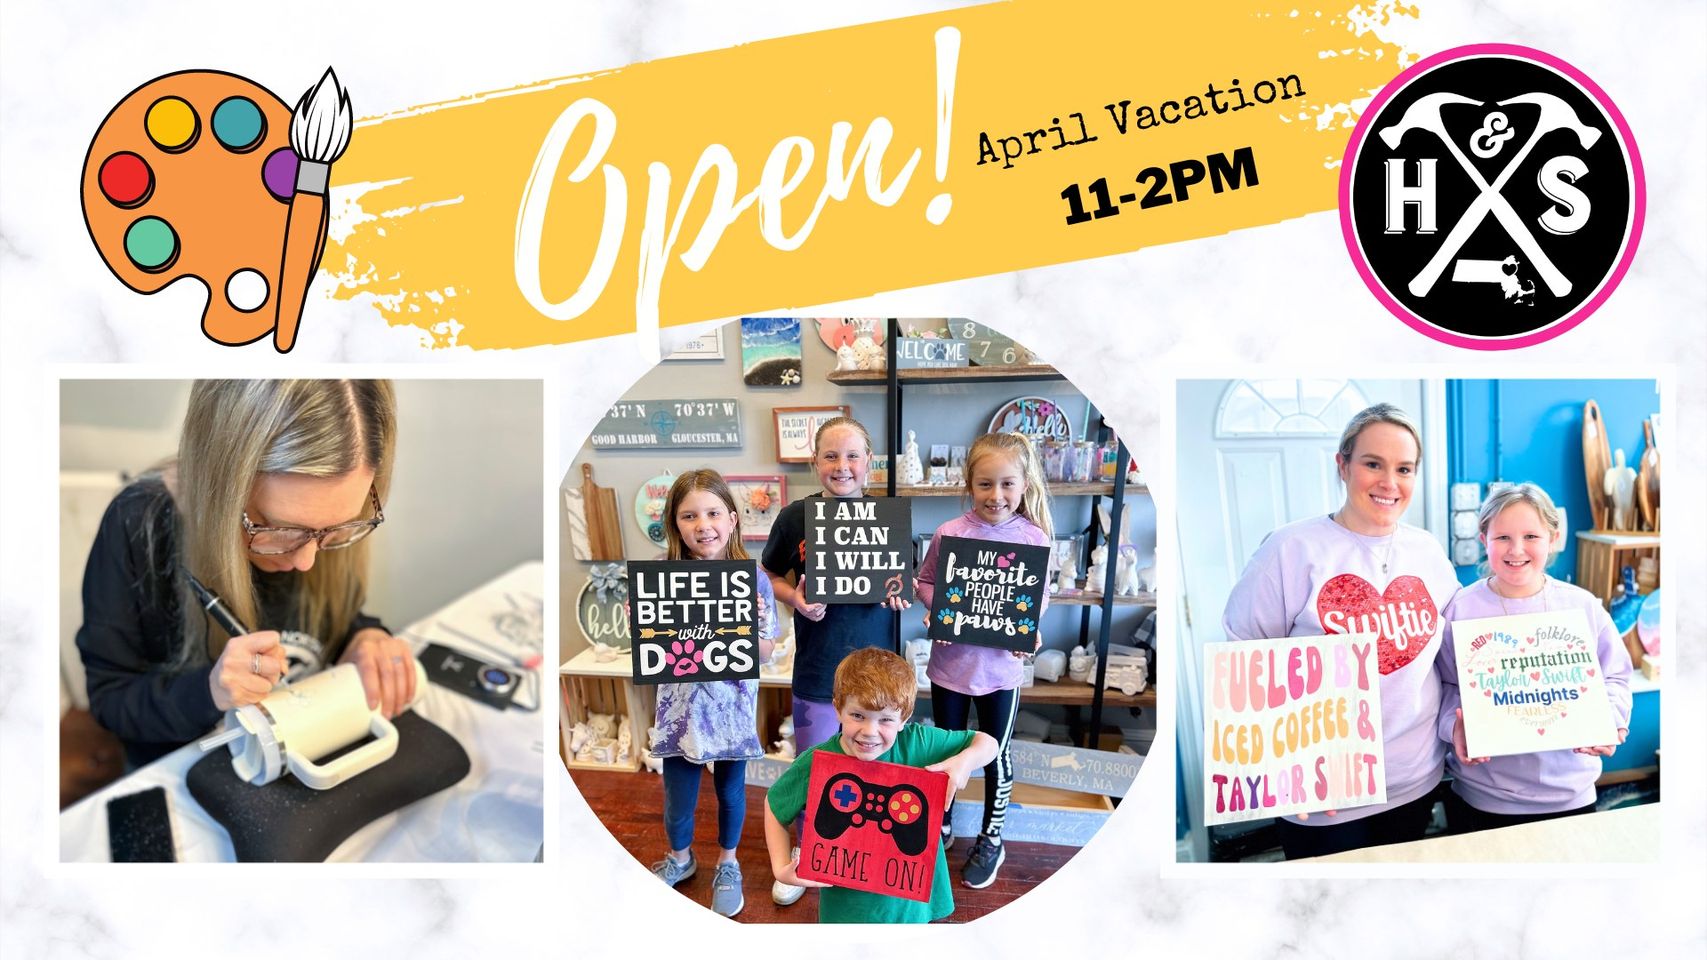 A vibrant collage showcases a craft booth sign, a lady creating a unique t-shirt, and customers of all ages – including kids – proudly displaying their handmade shirts. The text shares details about April vacation hours.